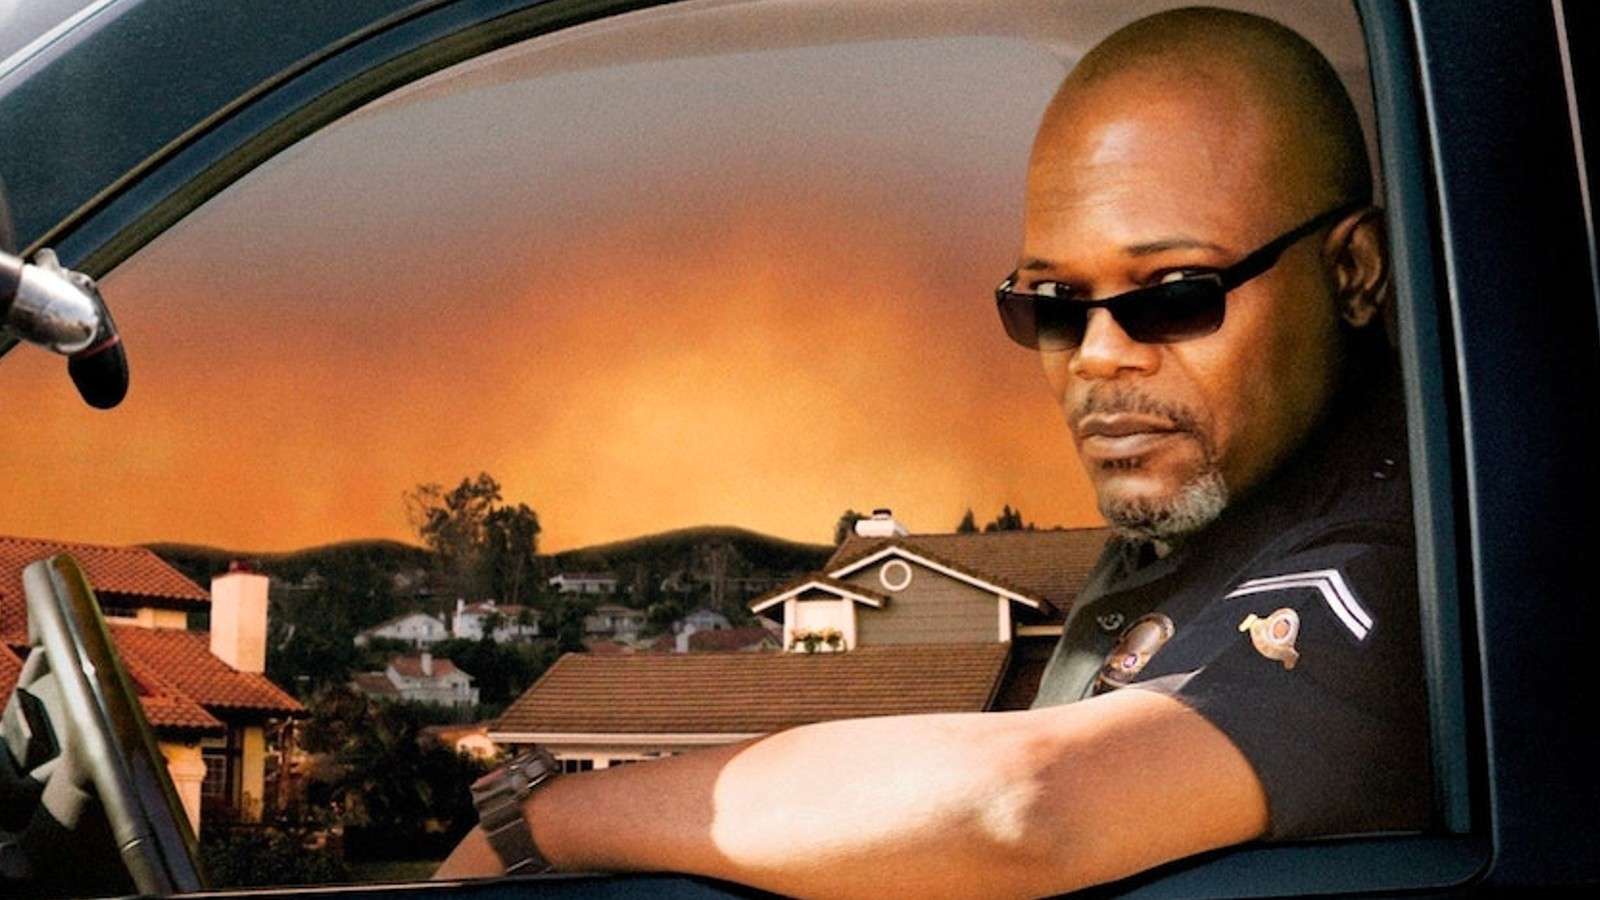 Samuel L. Jackson on the poster for Lakeview Terrace